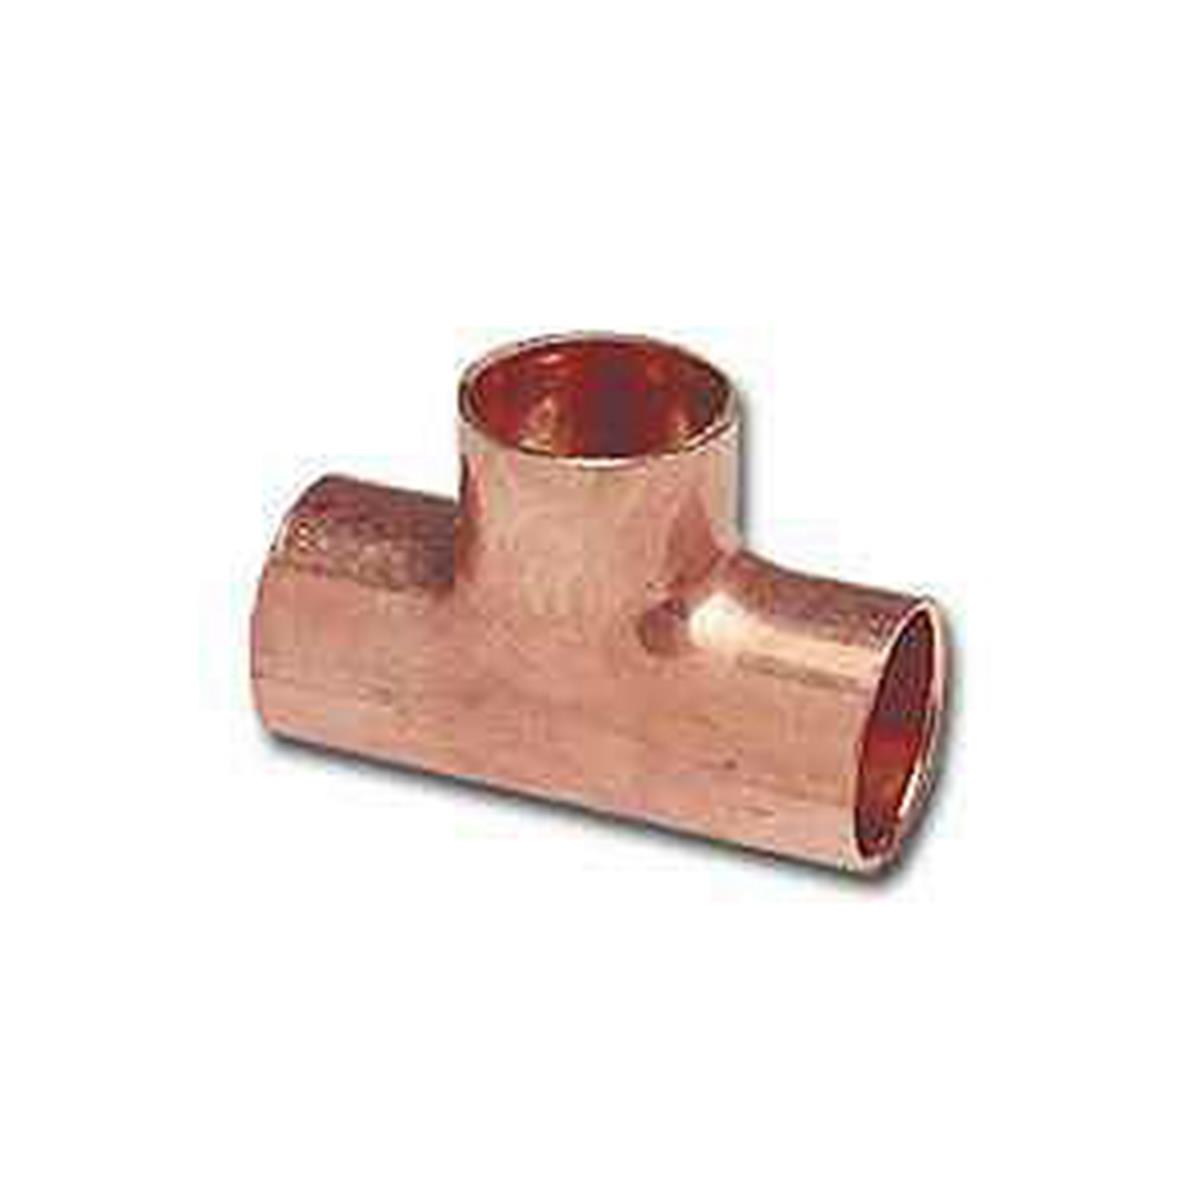 Picture of Elkhart Products 46393 0.5 x 0.5 x 0.75 in Copper Tee- pack of 10